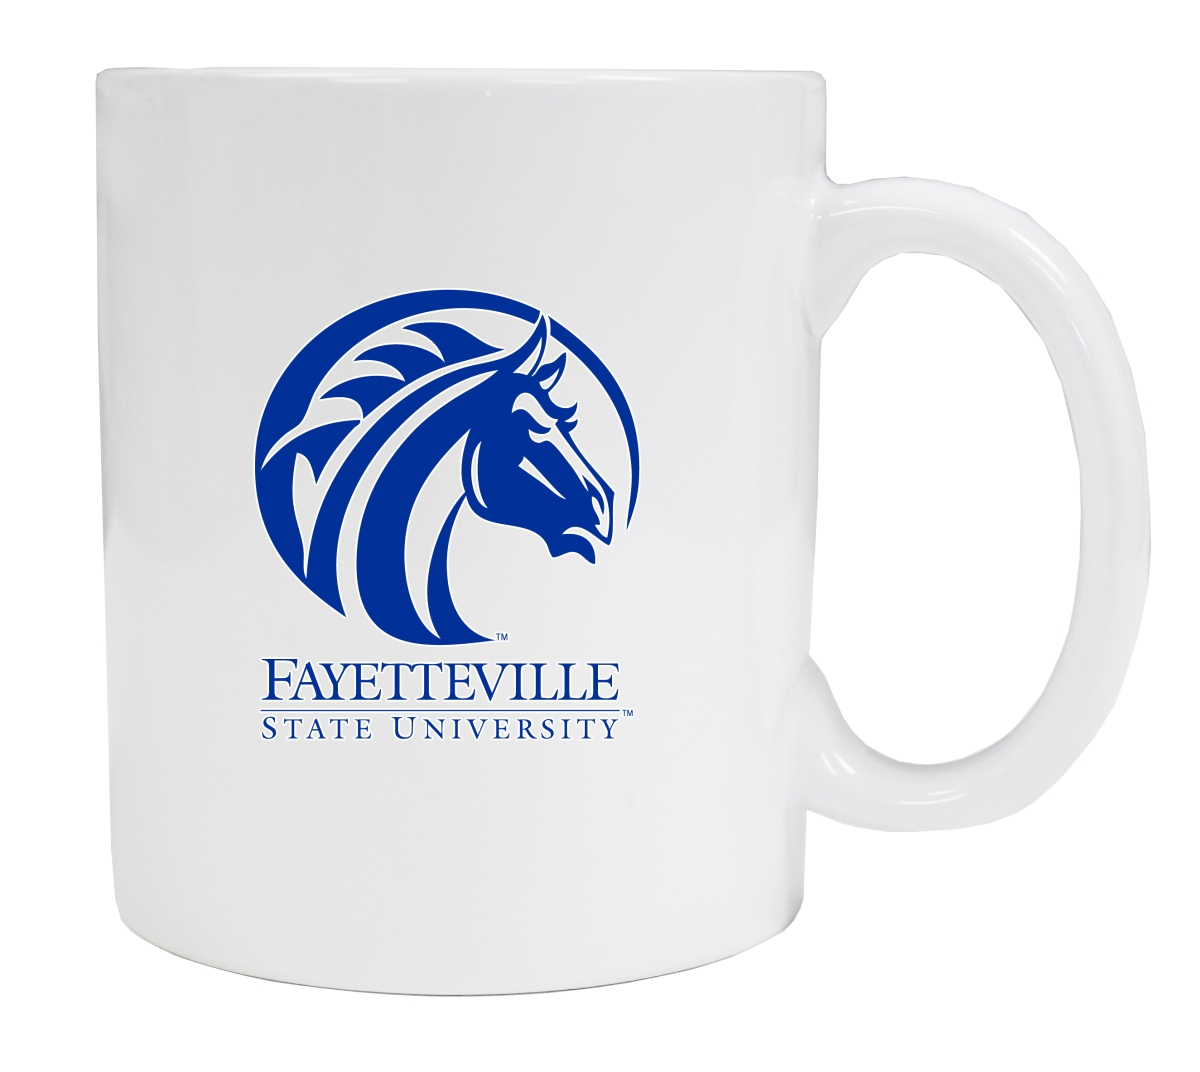 Picture of R & R Imports MUG2-C-FAY19 W Fayetteville State University White Ceramic Coffee Mug - Pack of 2